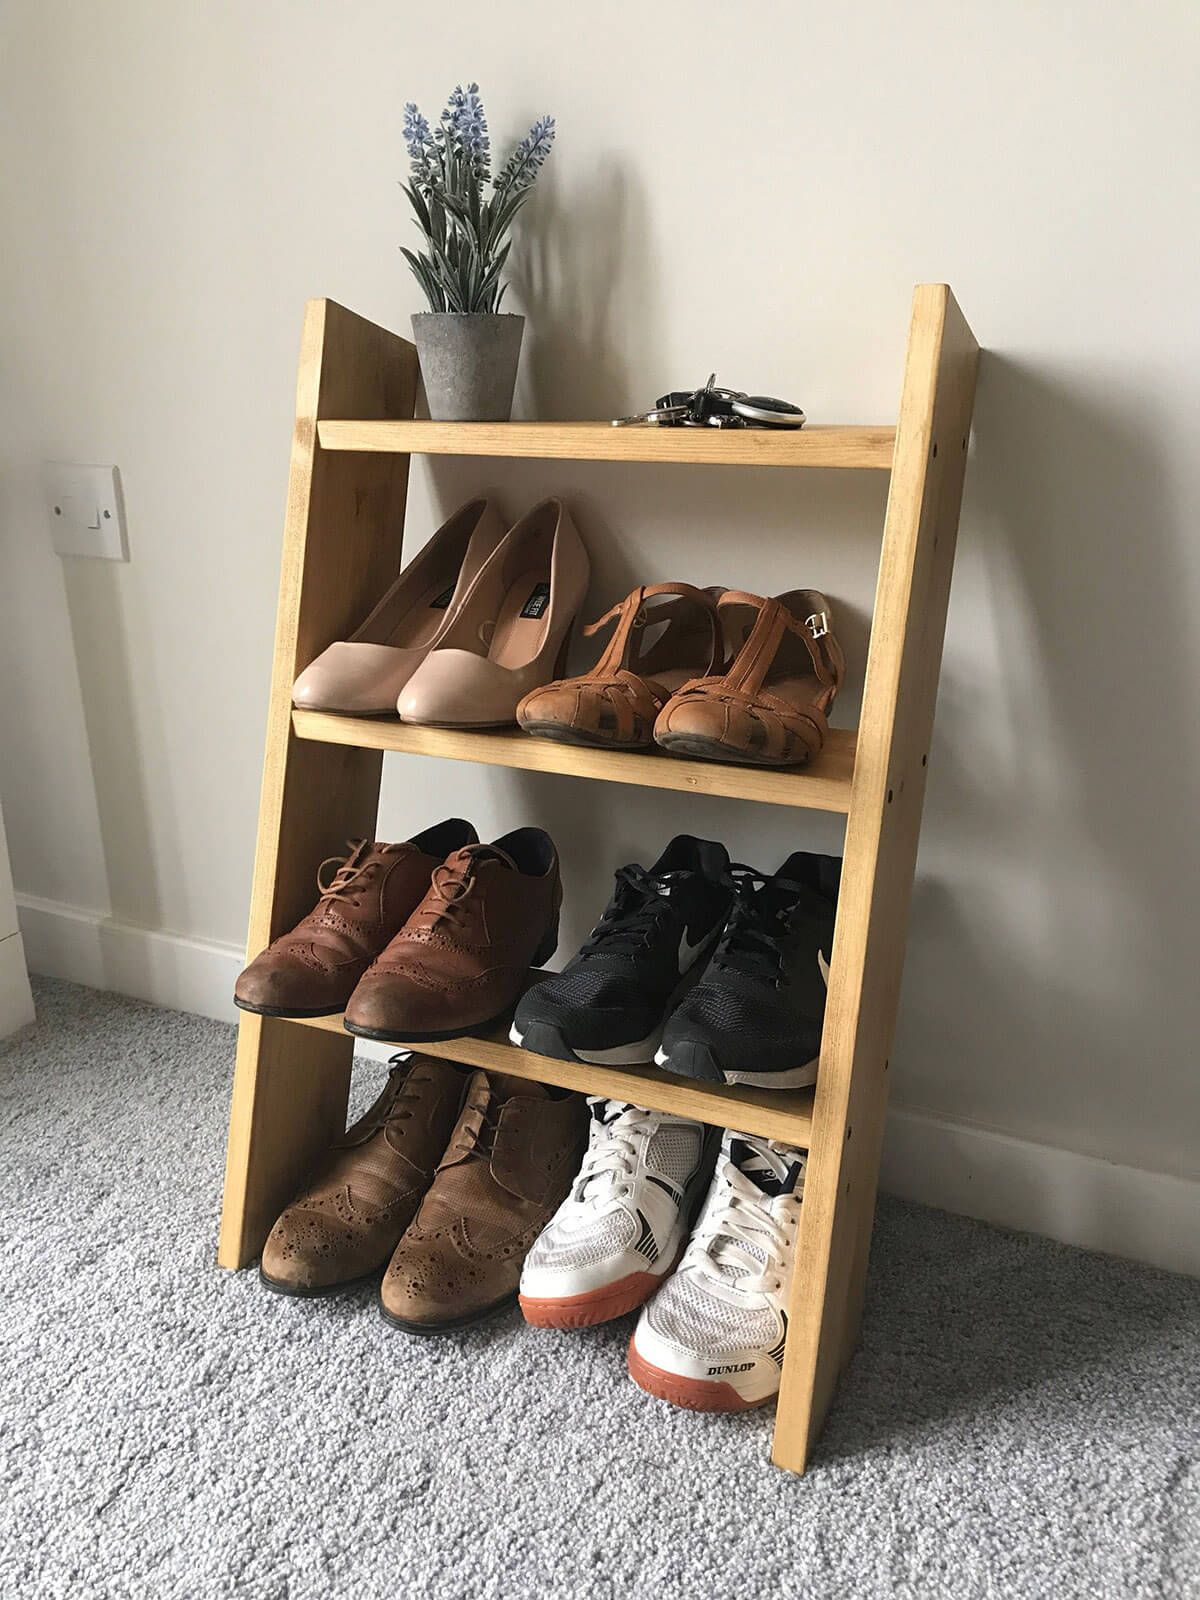 Chic and Simple Ladder-Style Shoe Rack